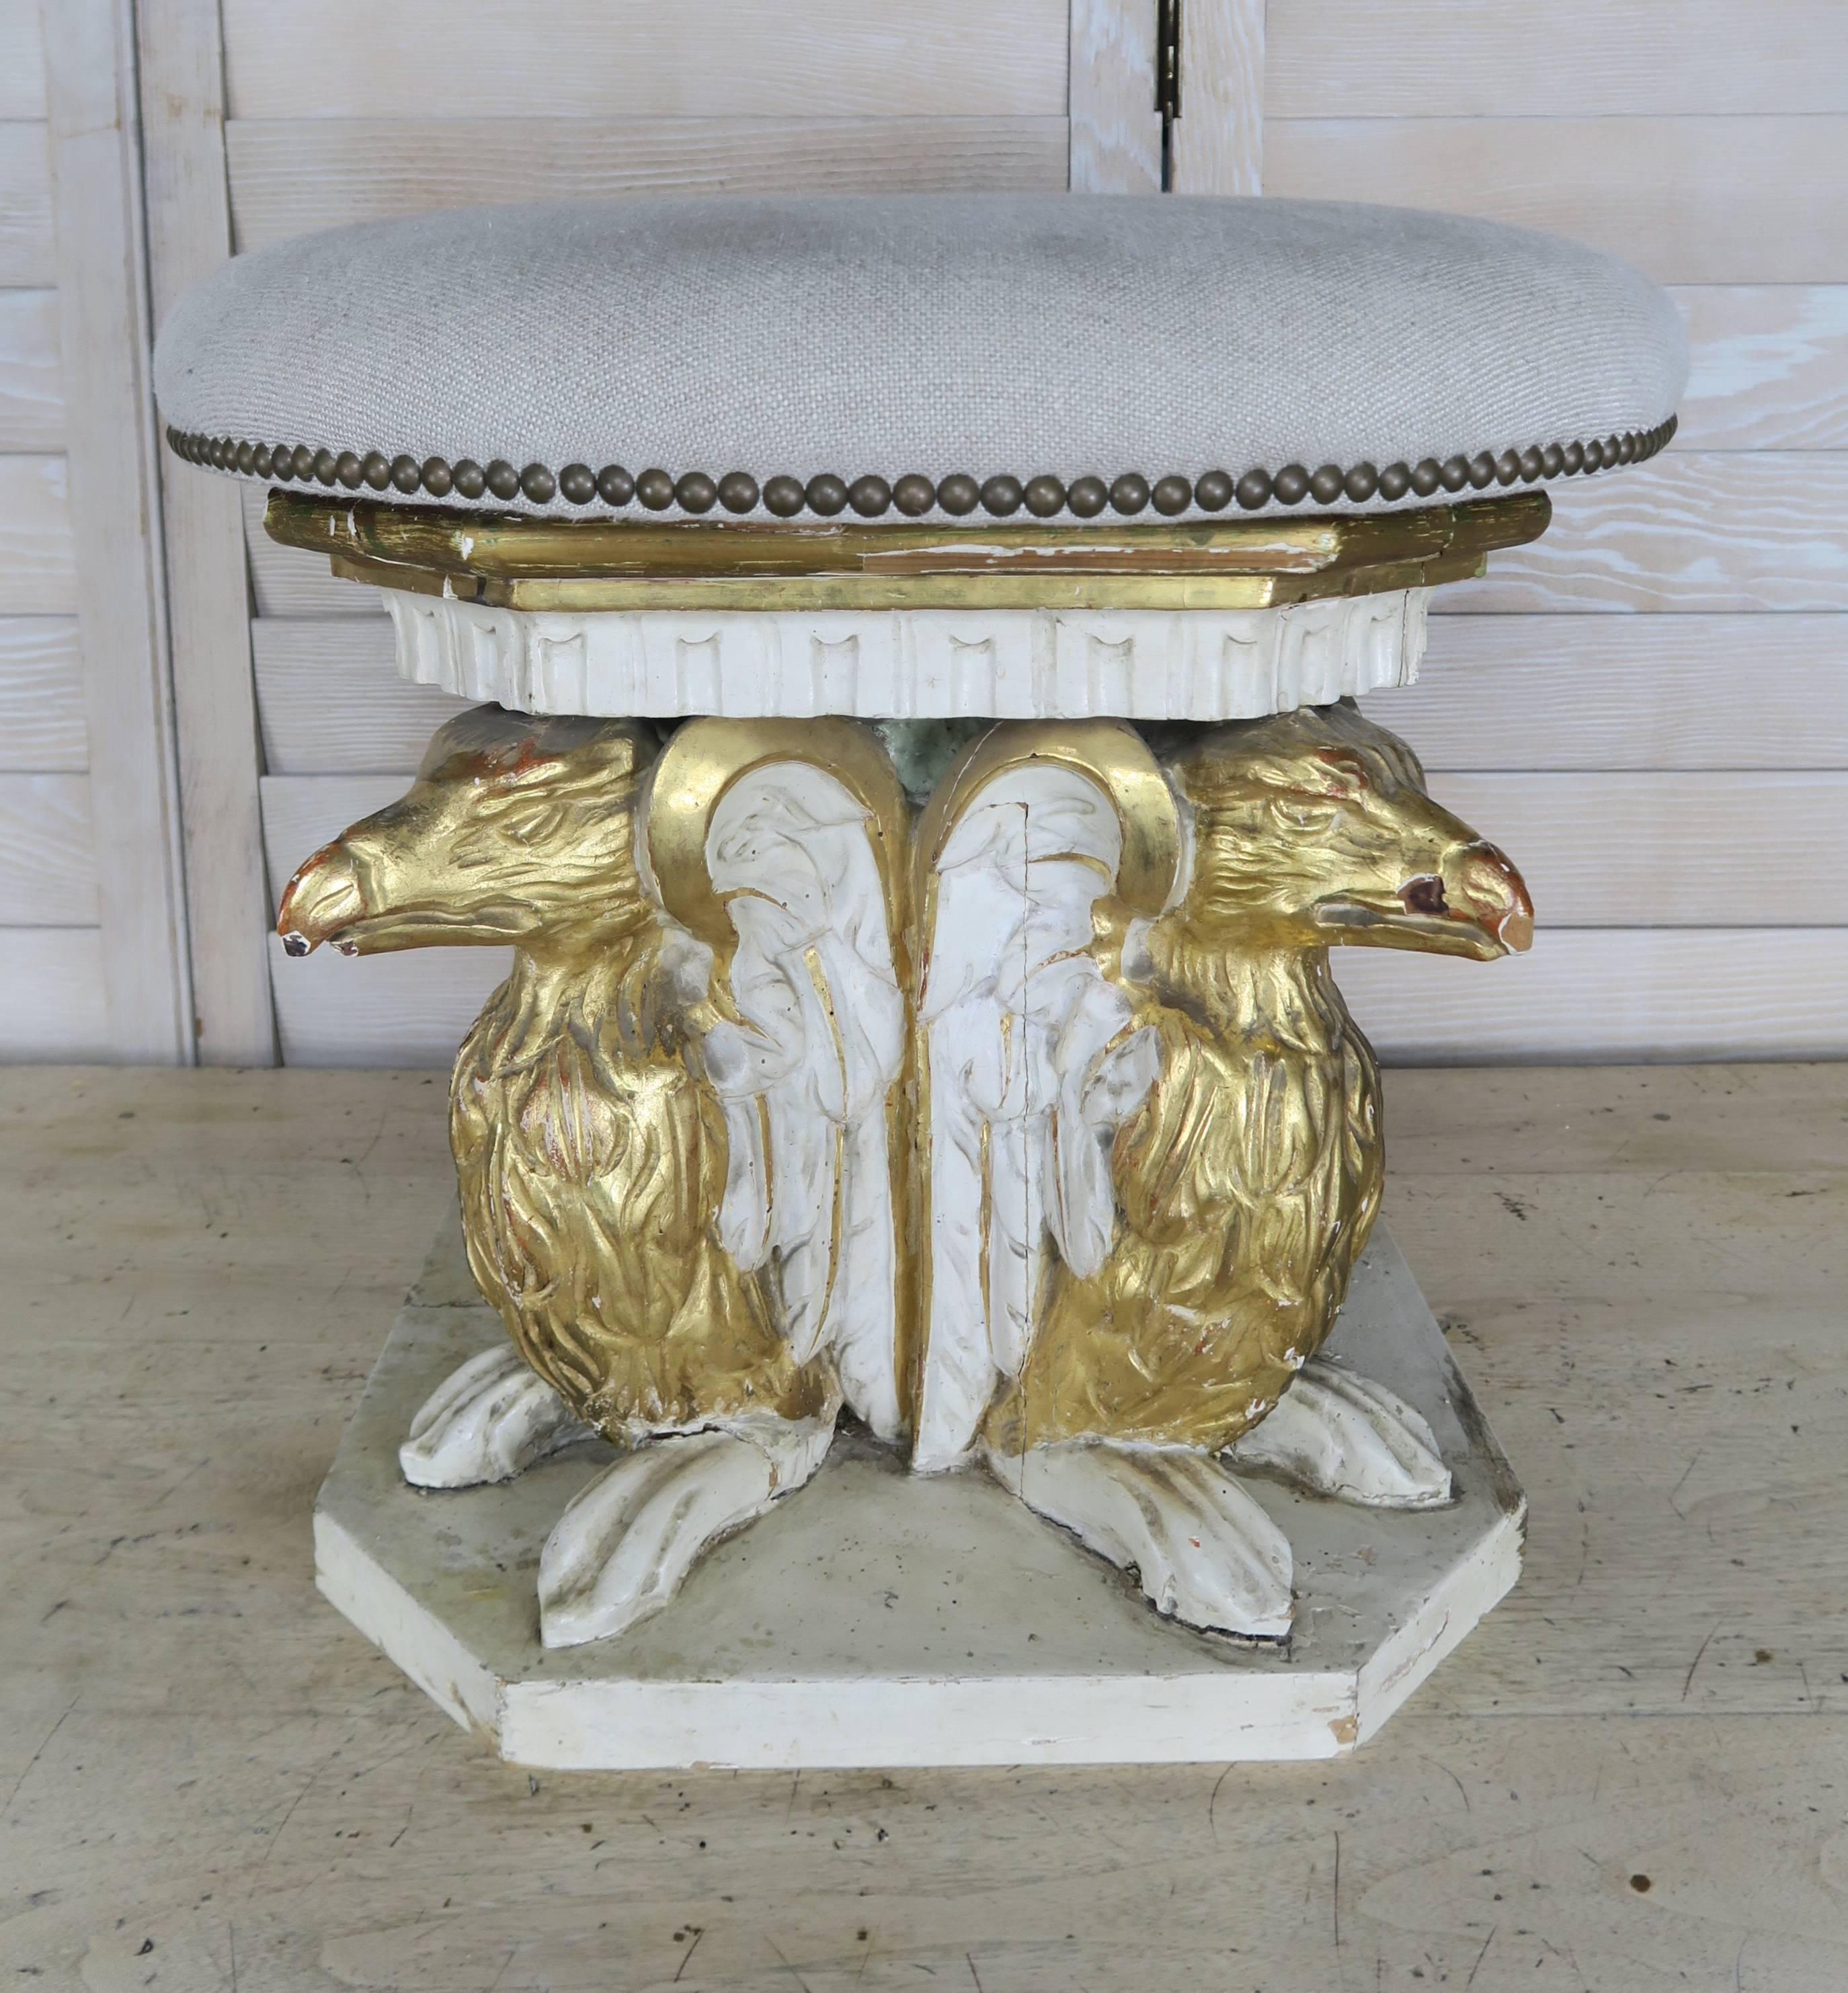 Pair of 19th century Italian painted and parcel-gilt stools comprised of four winged griffins. The stools are newly upholstered in Belgium linen and detailed with nail head trim.